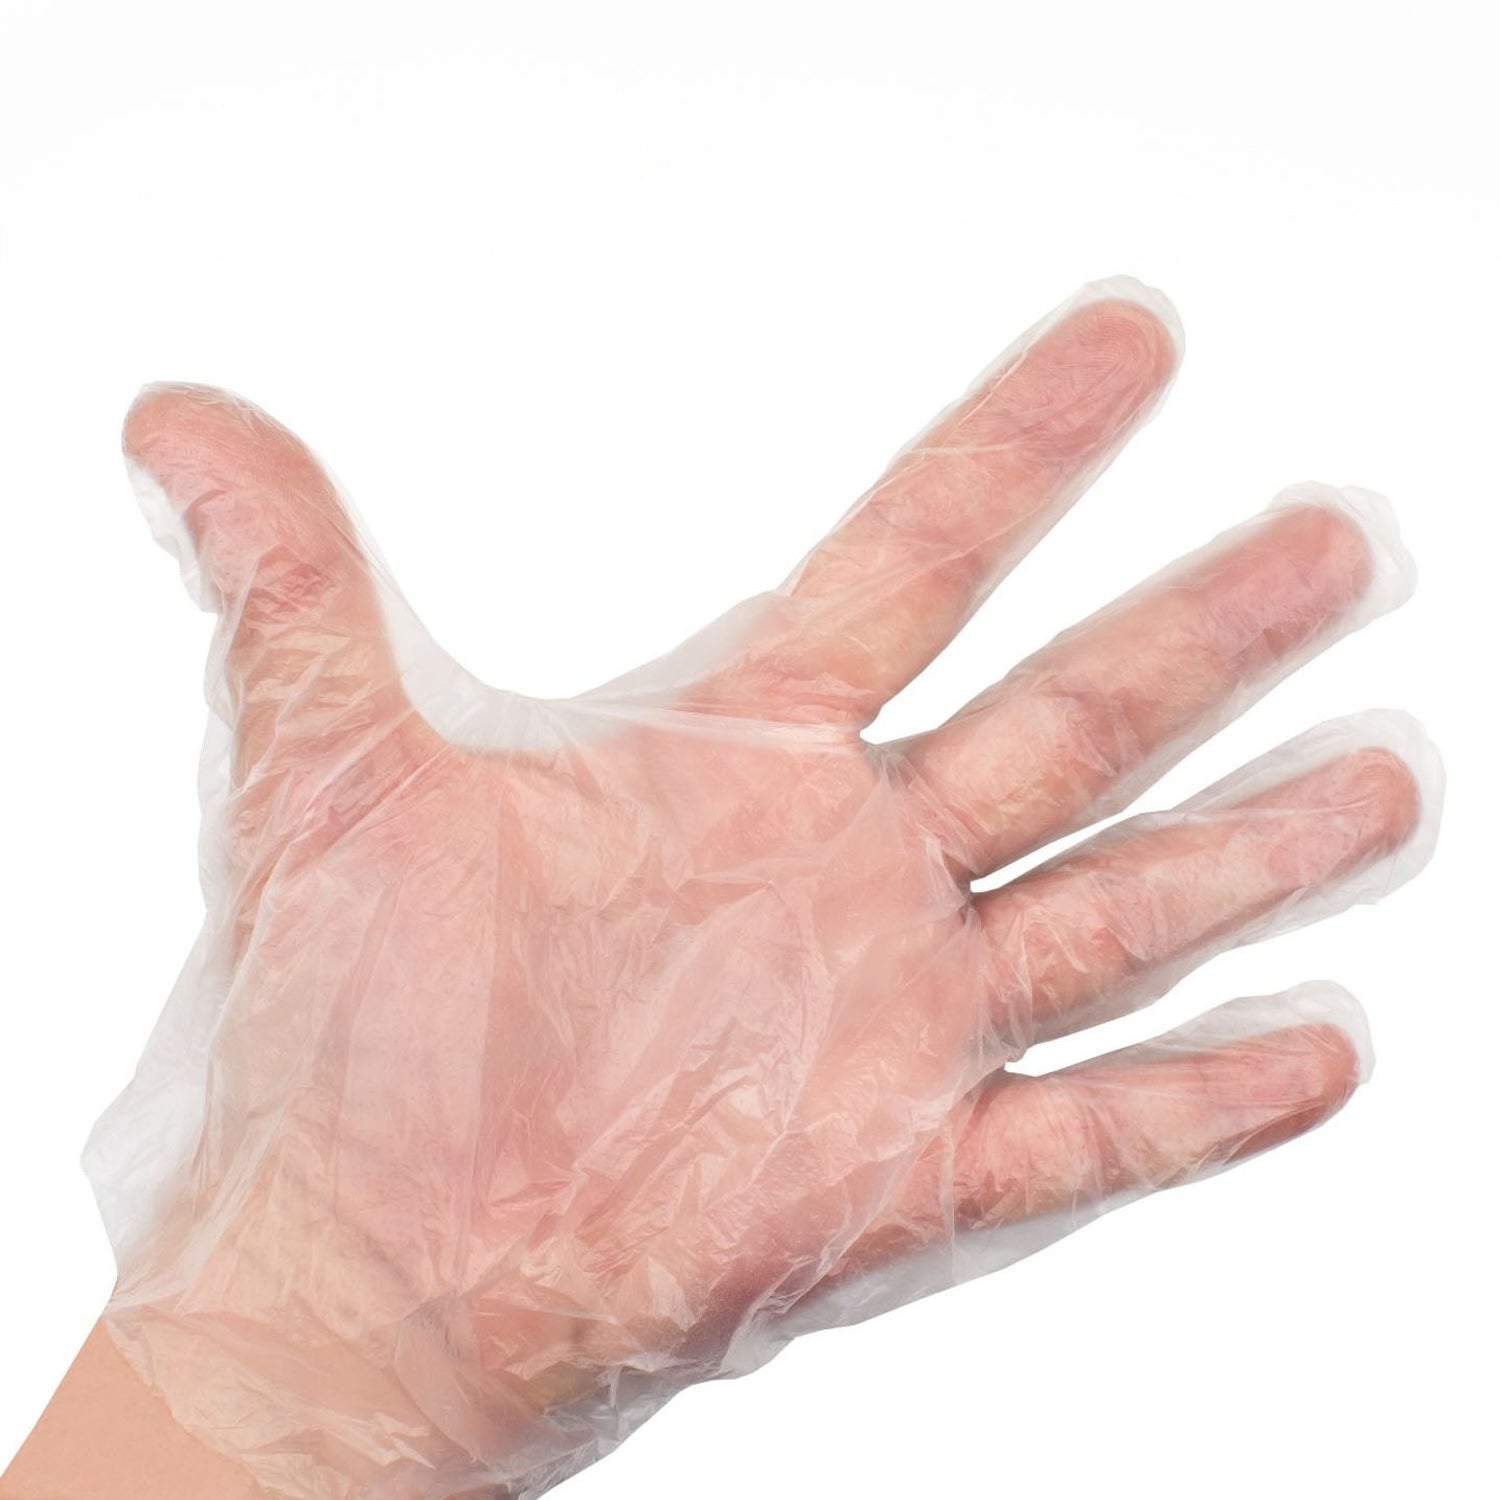 Polythene Disposable Gloves | Medium | Pack of 100 Pieces